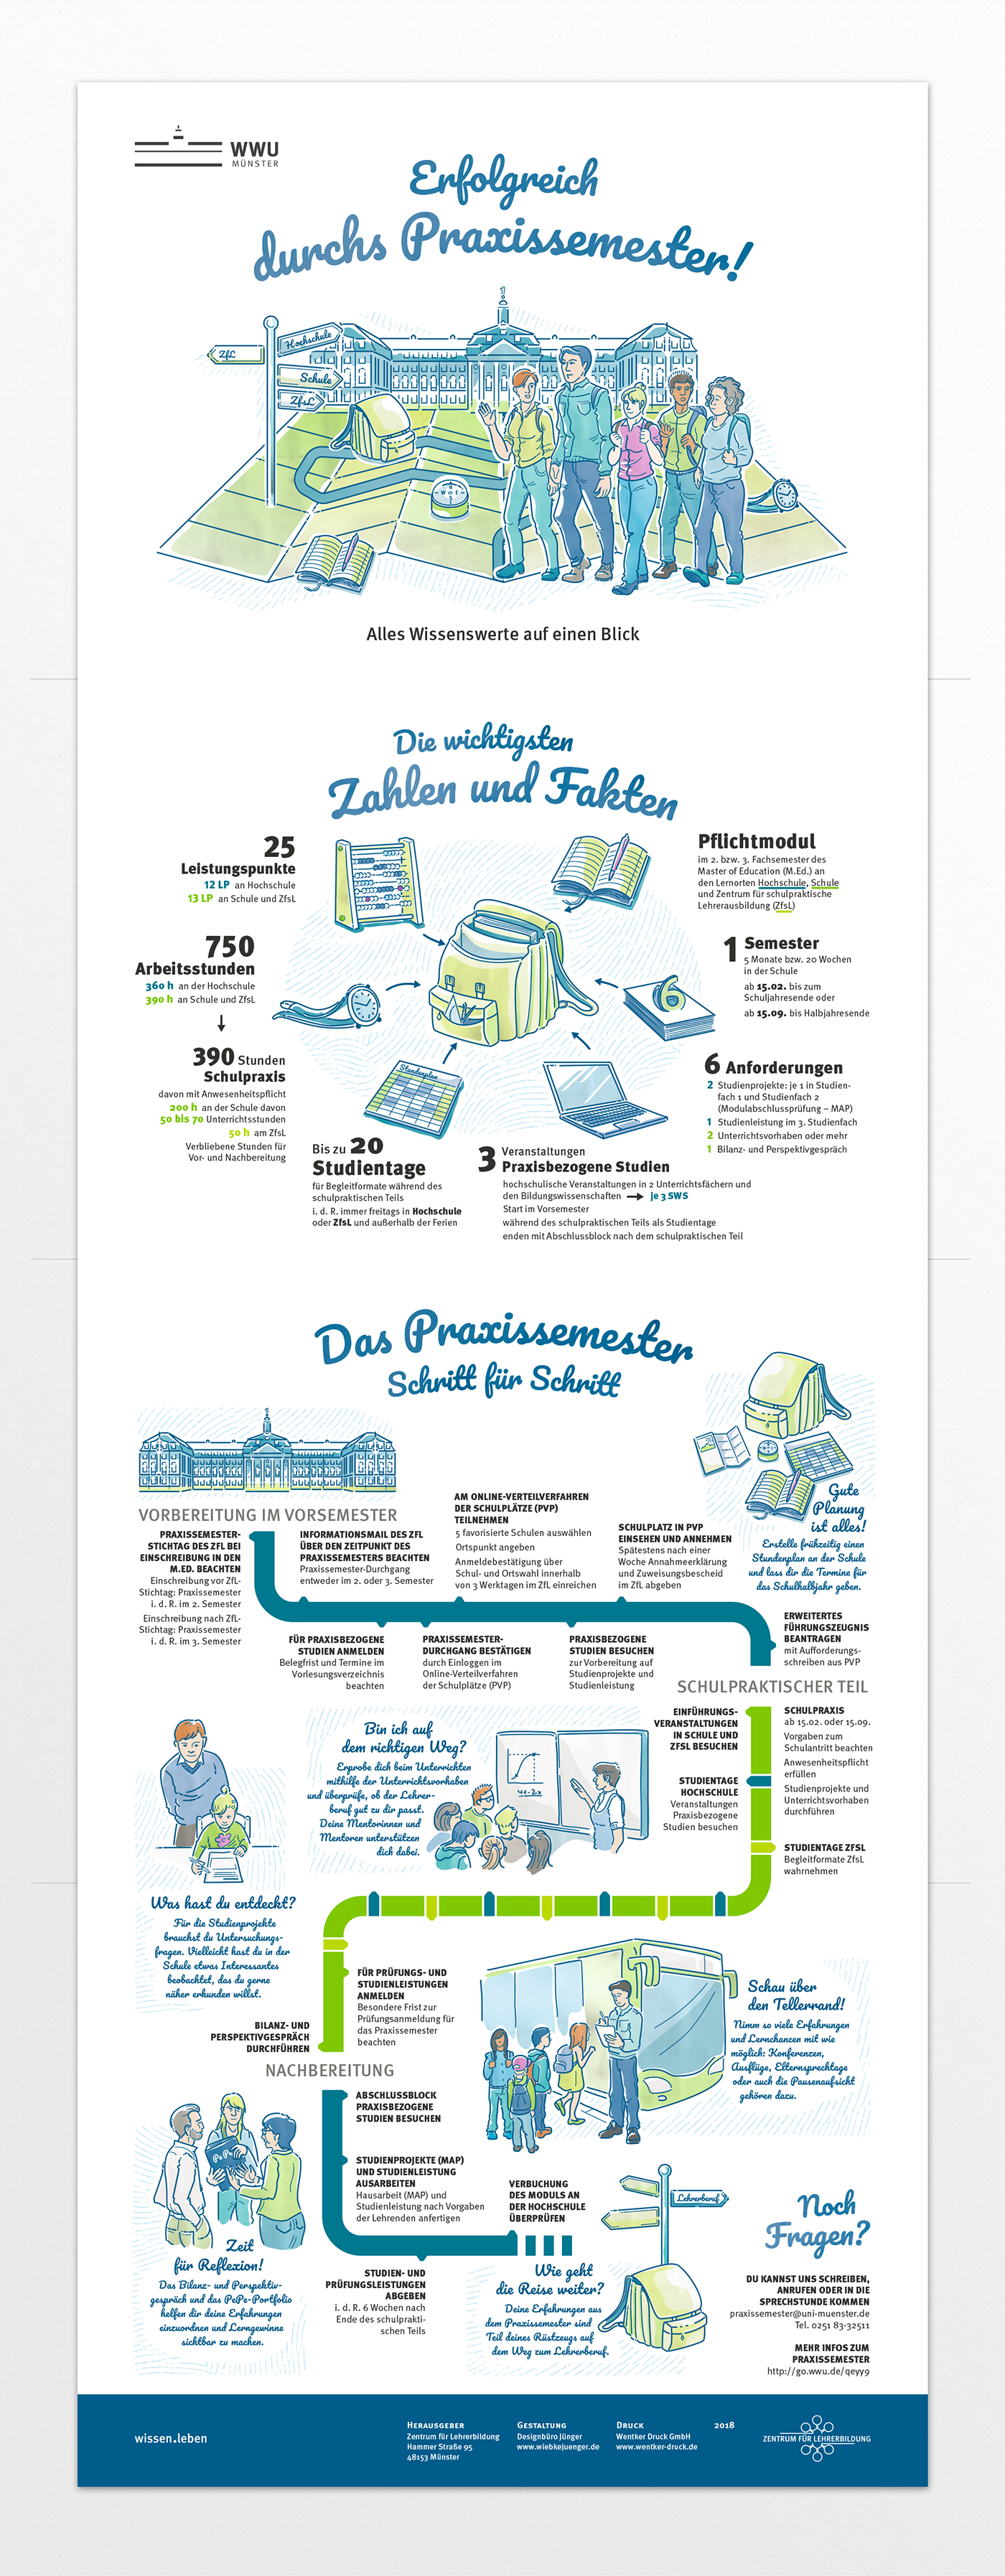 complete infographic of the way to become a teacher at the university of münster, germany